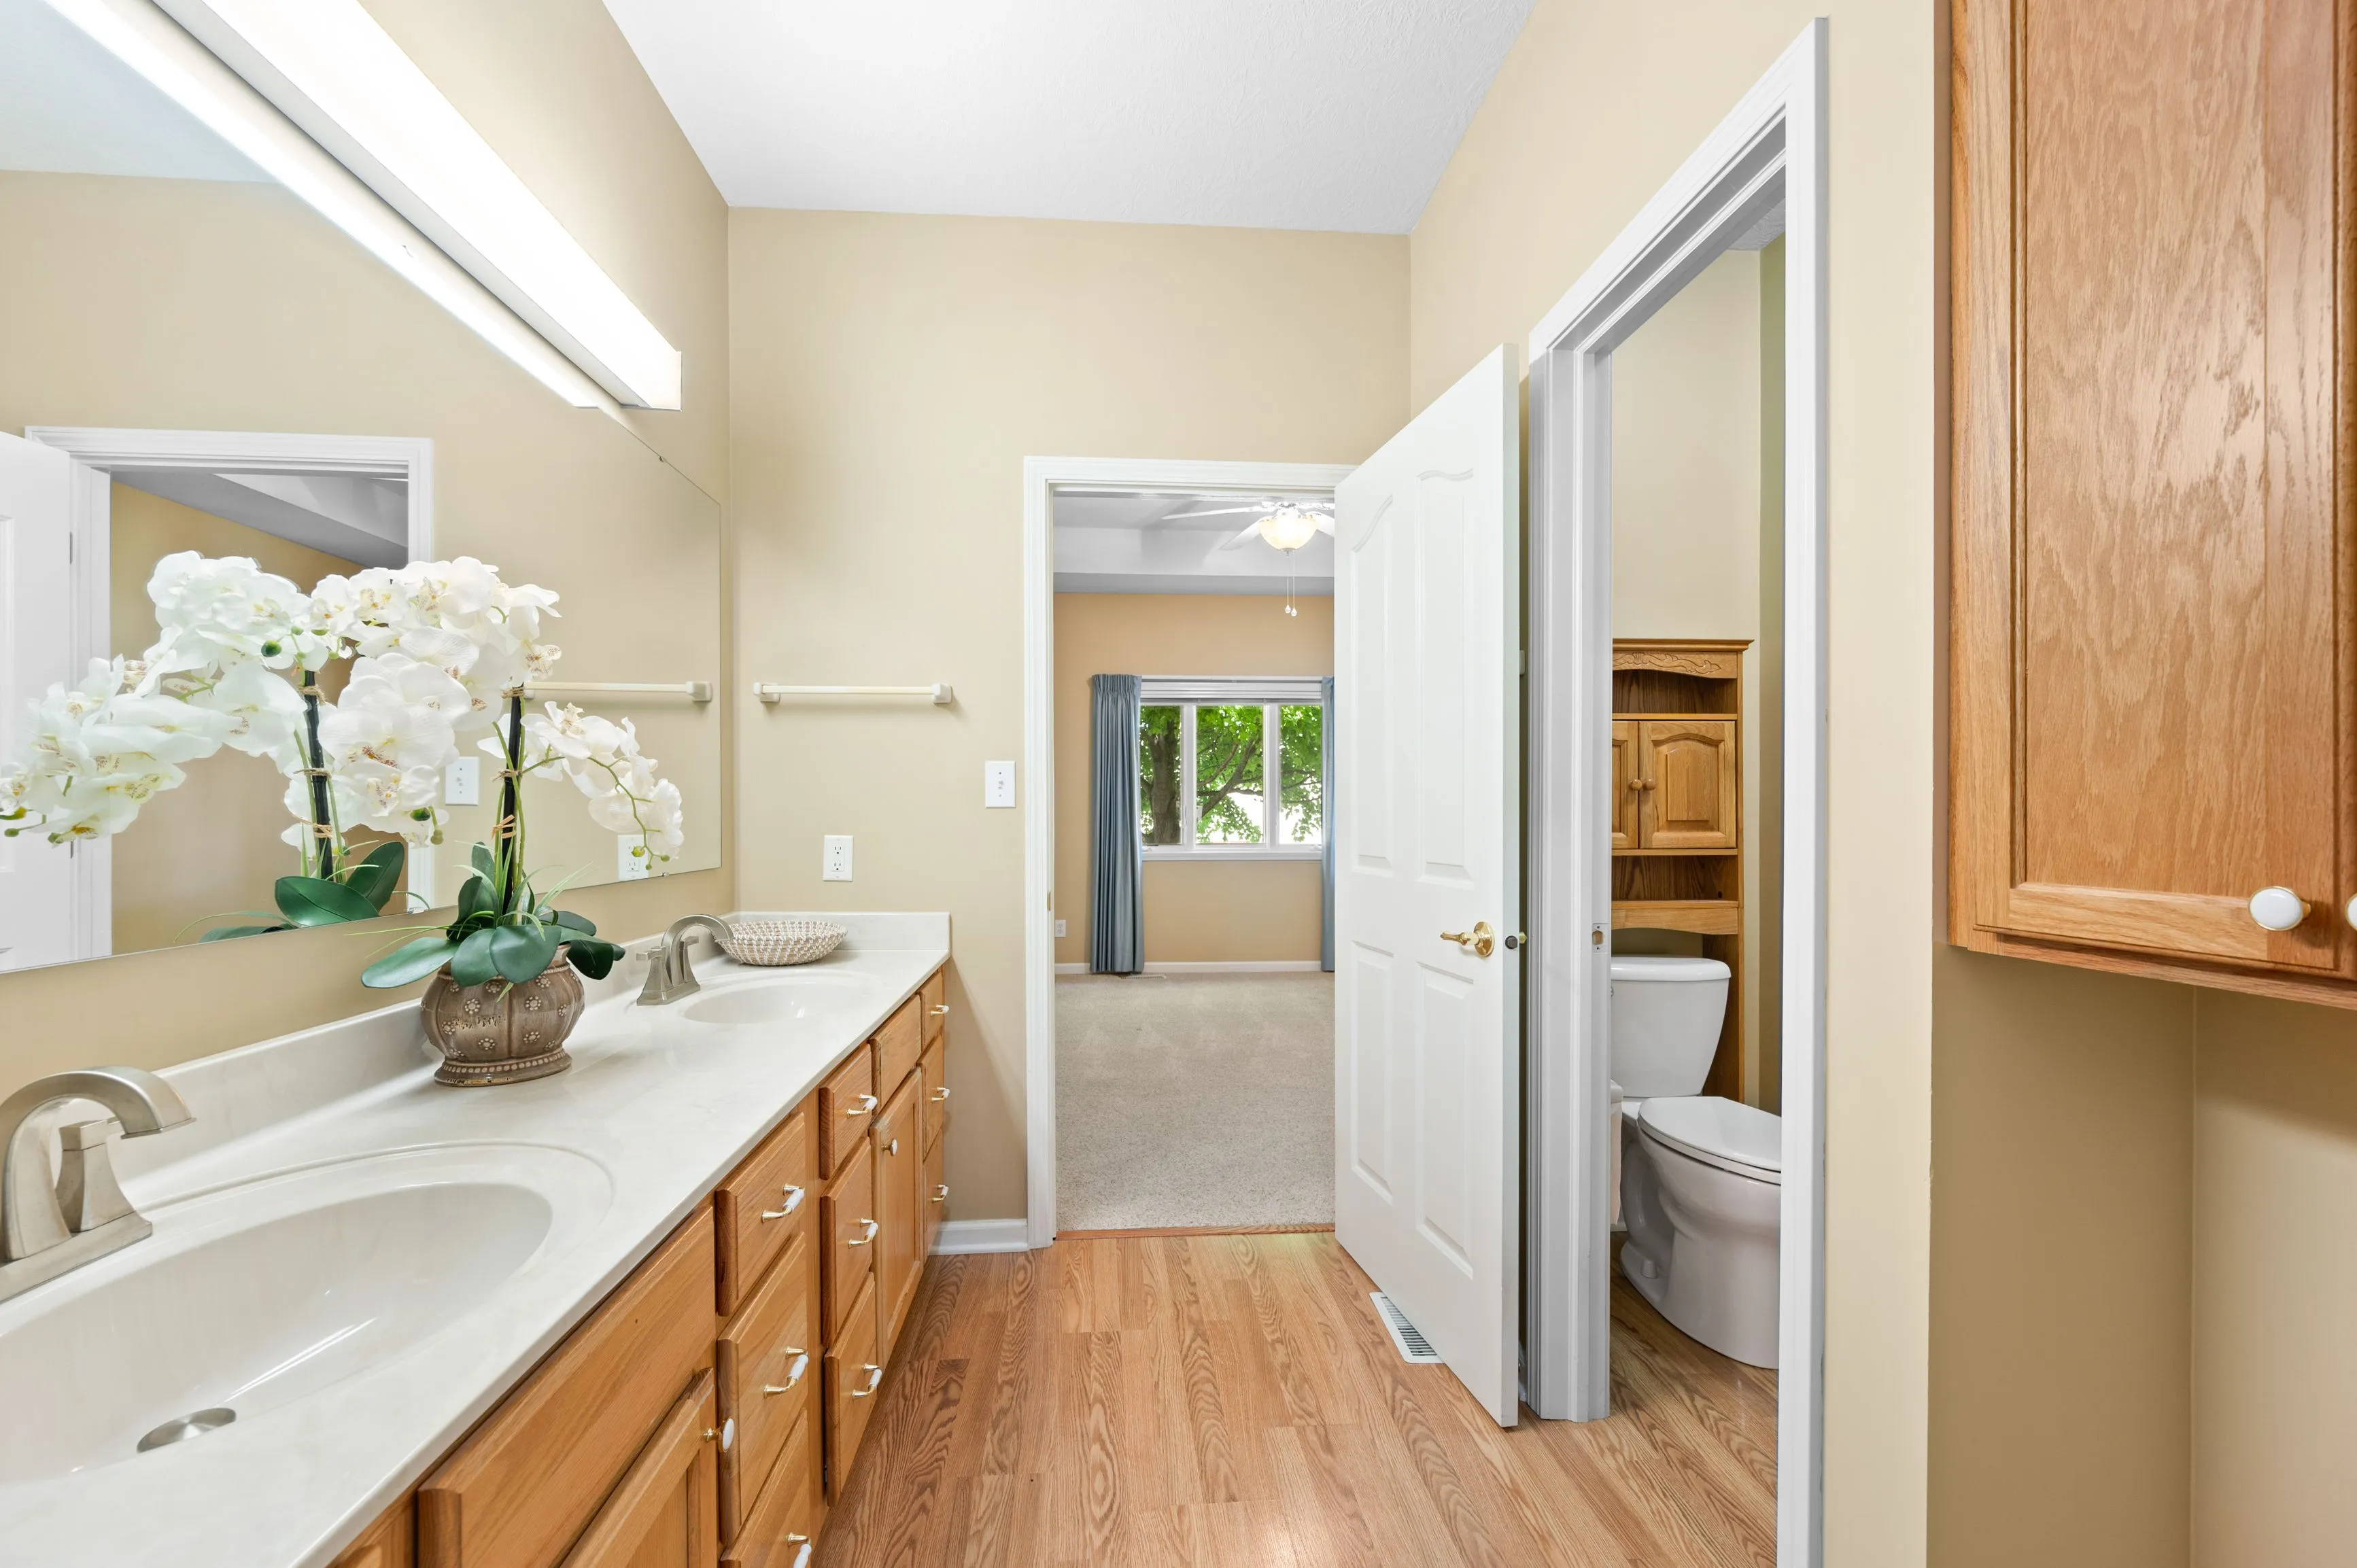 Bright bathroom interior featuring a long vanity with a white countertop, double sinks, a large mirror, and a wooden cabinet, with a toilet visible in a separate room through an open door. A bouquet of white orchids adds a decorative touch, and a doorway to an adjoining room with a window suggests a suite layout.